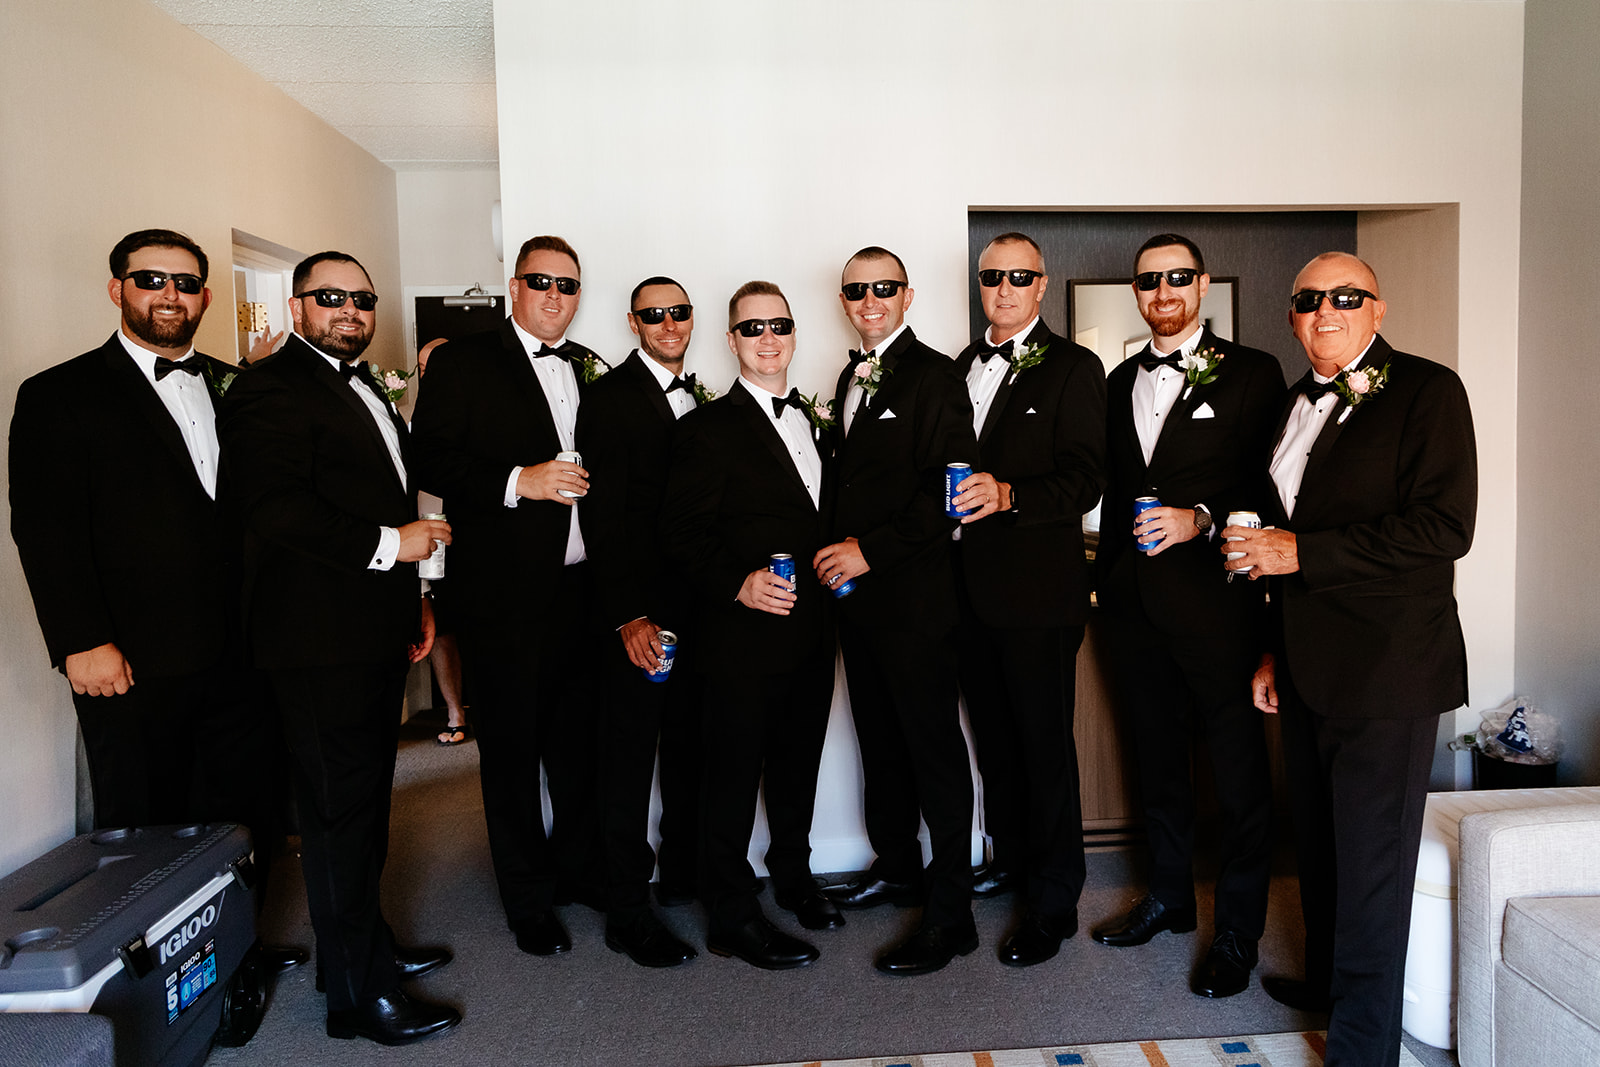 Groom and groomsmen in formal attire with sunglasses, holding drinks, pose together in a room.